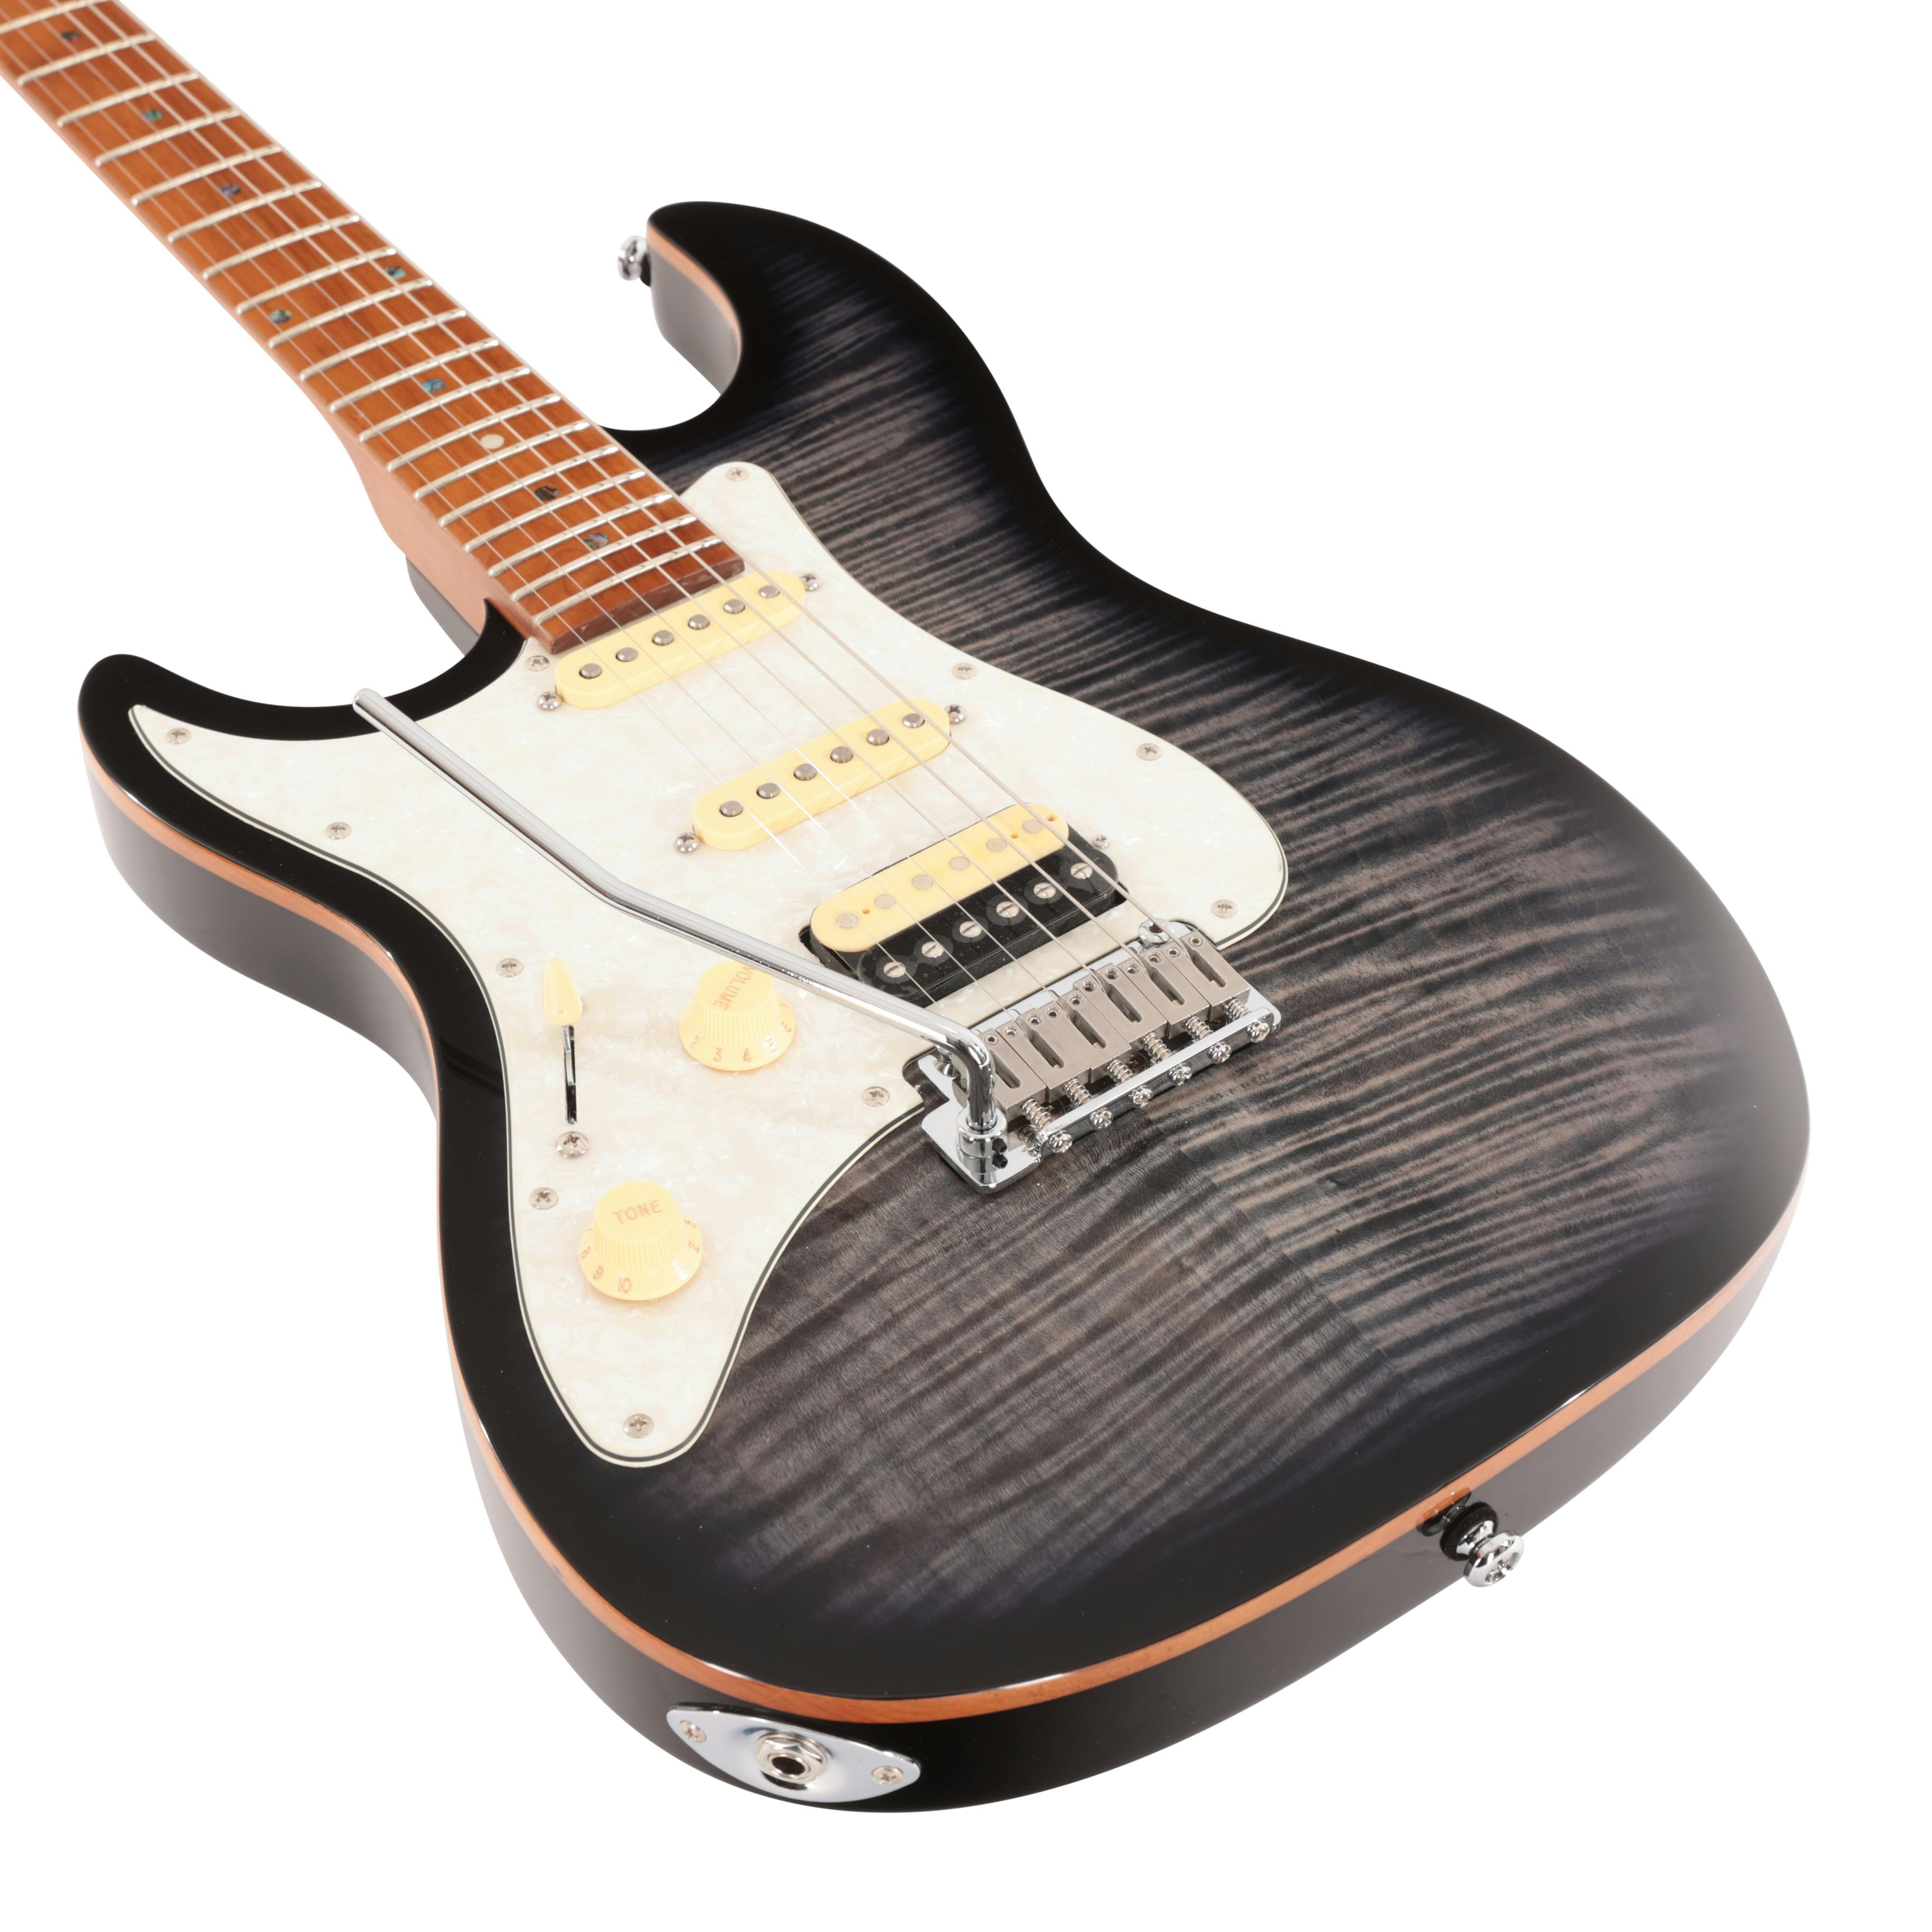 Sire Larry Carlton S7 FM Left Handed Electric Guitar in Trans Black -  Andertons Music Co.